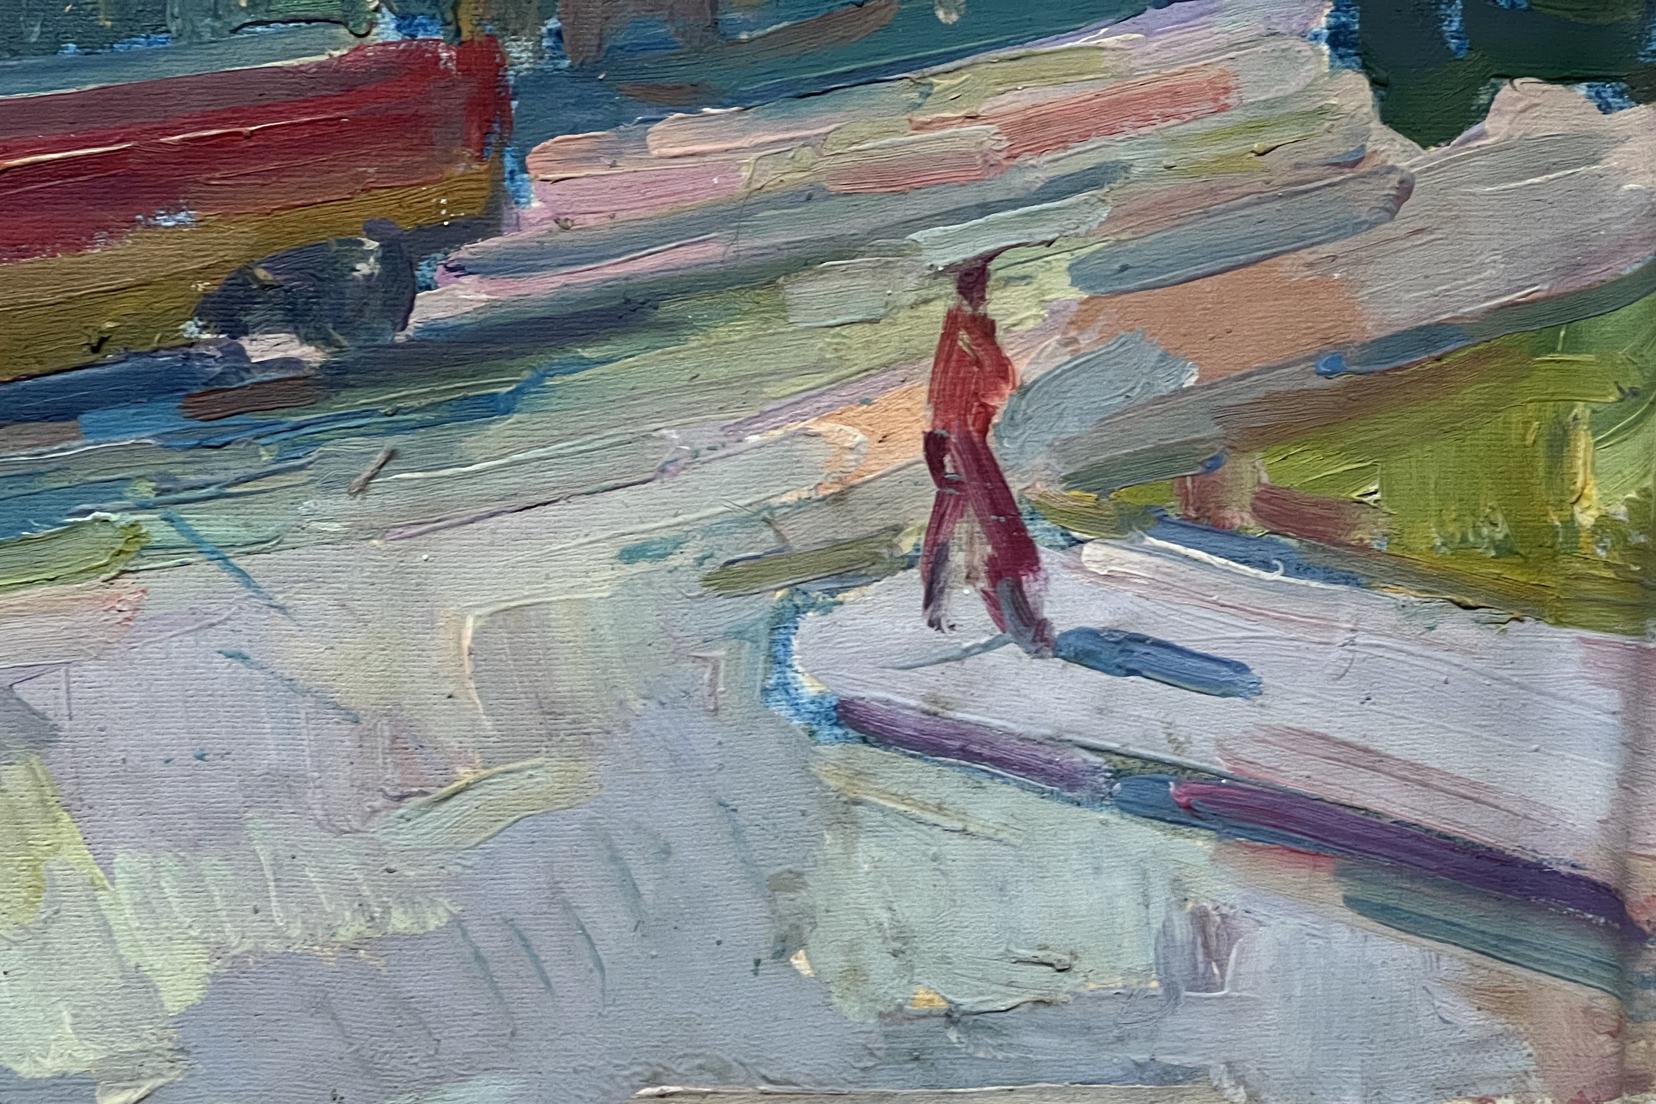 Peter Dobrev's oil masterpiece: "Abstracted Stop"